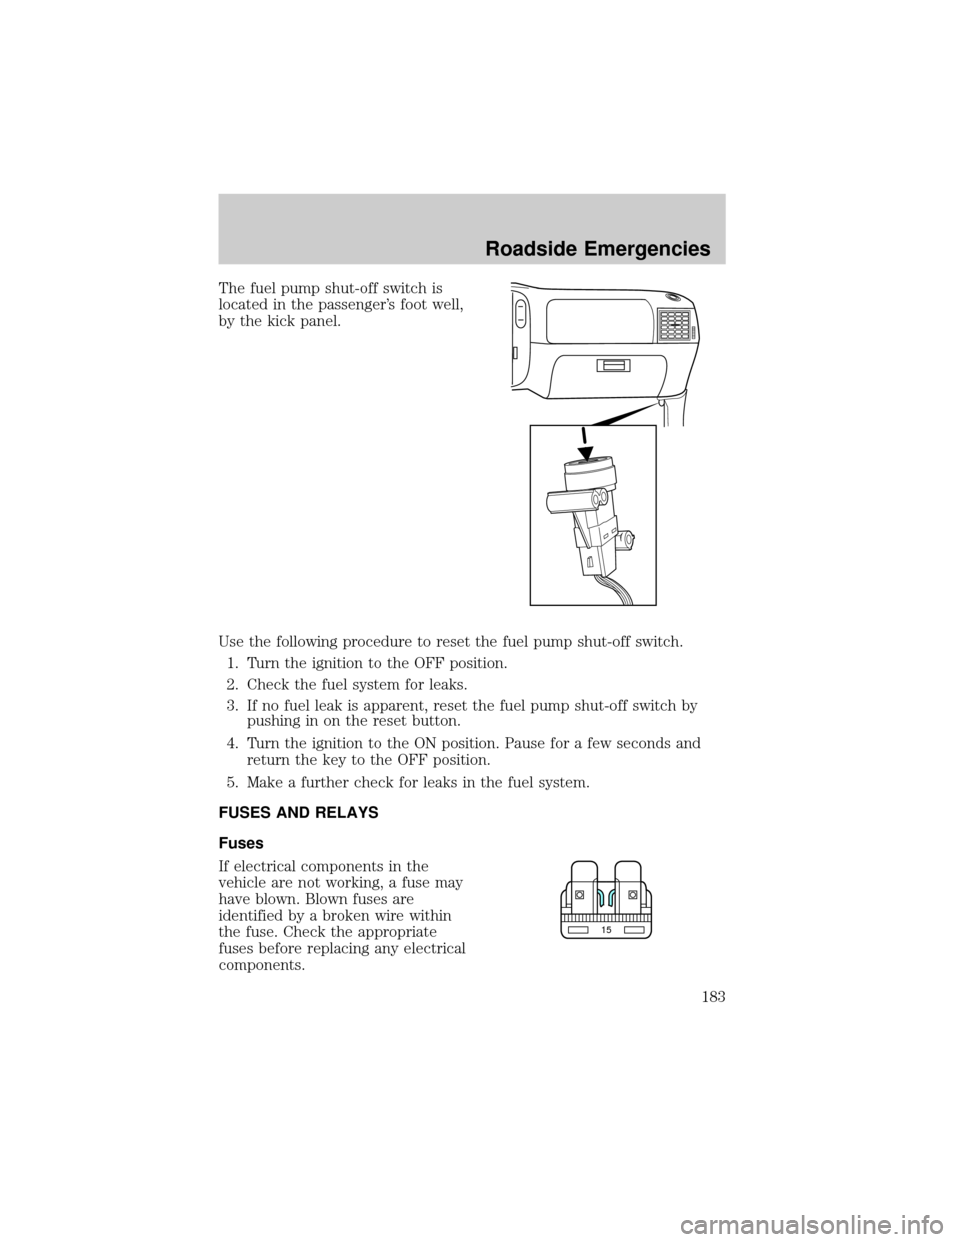 MAZDA MODEL B3000 2002  Owners Manual (in English) The fuel pump shut-off switch is
located in the passengers foot well,
by the kick panel.
Use the following procedure to reset the fuel pump shut-off switch.
1. Turn the ignition to the OFF position.
